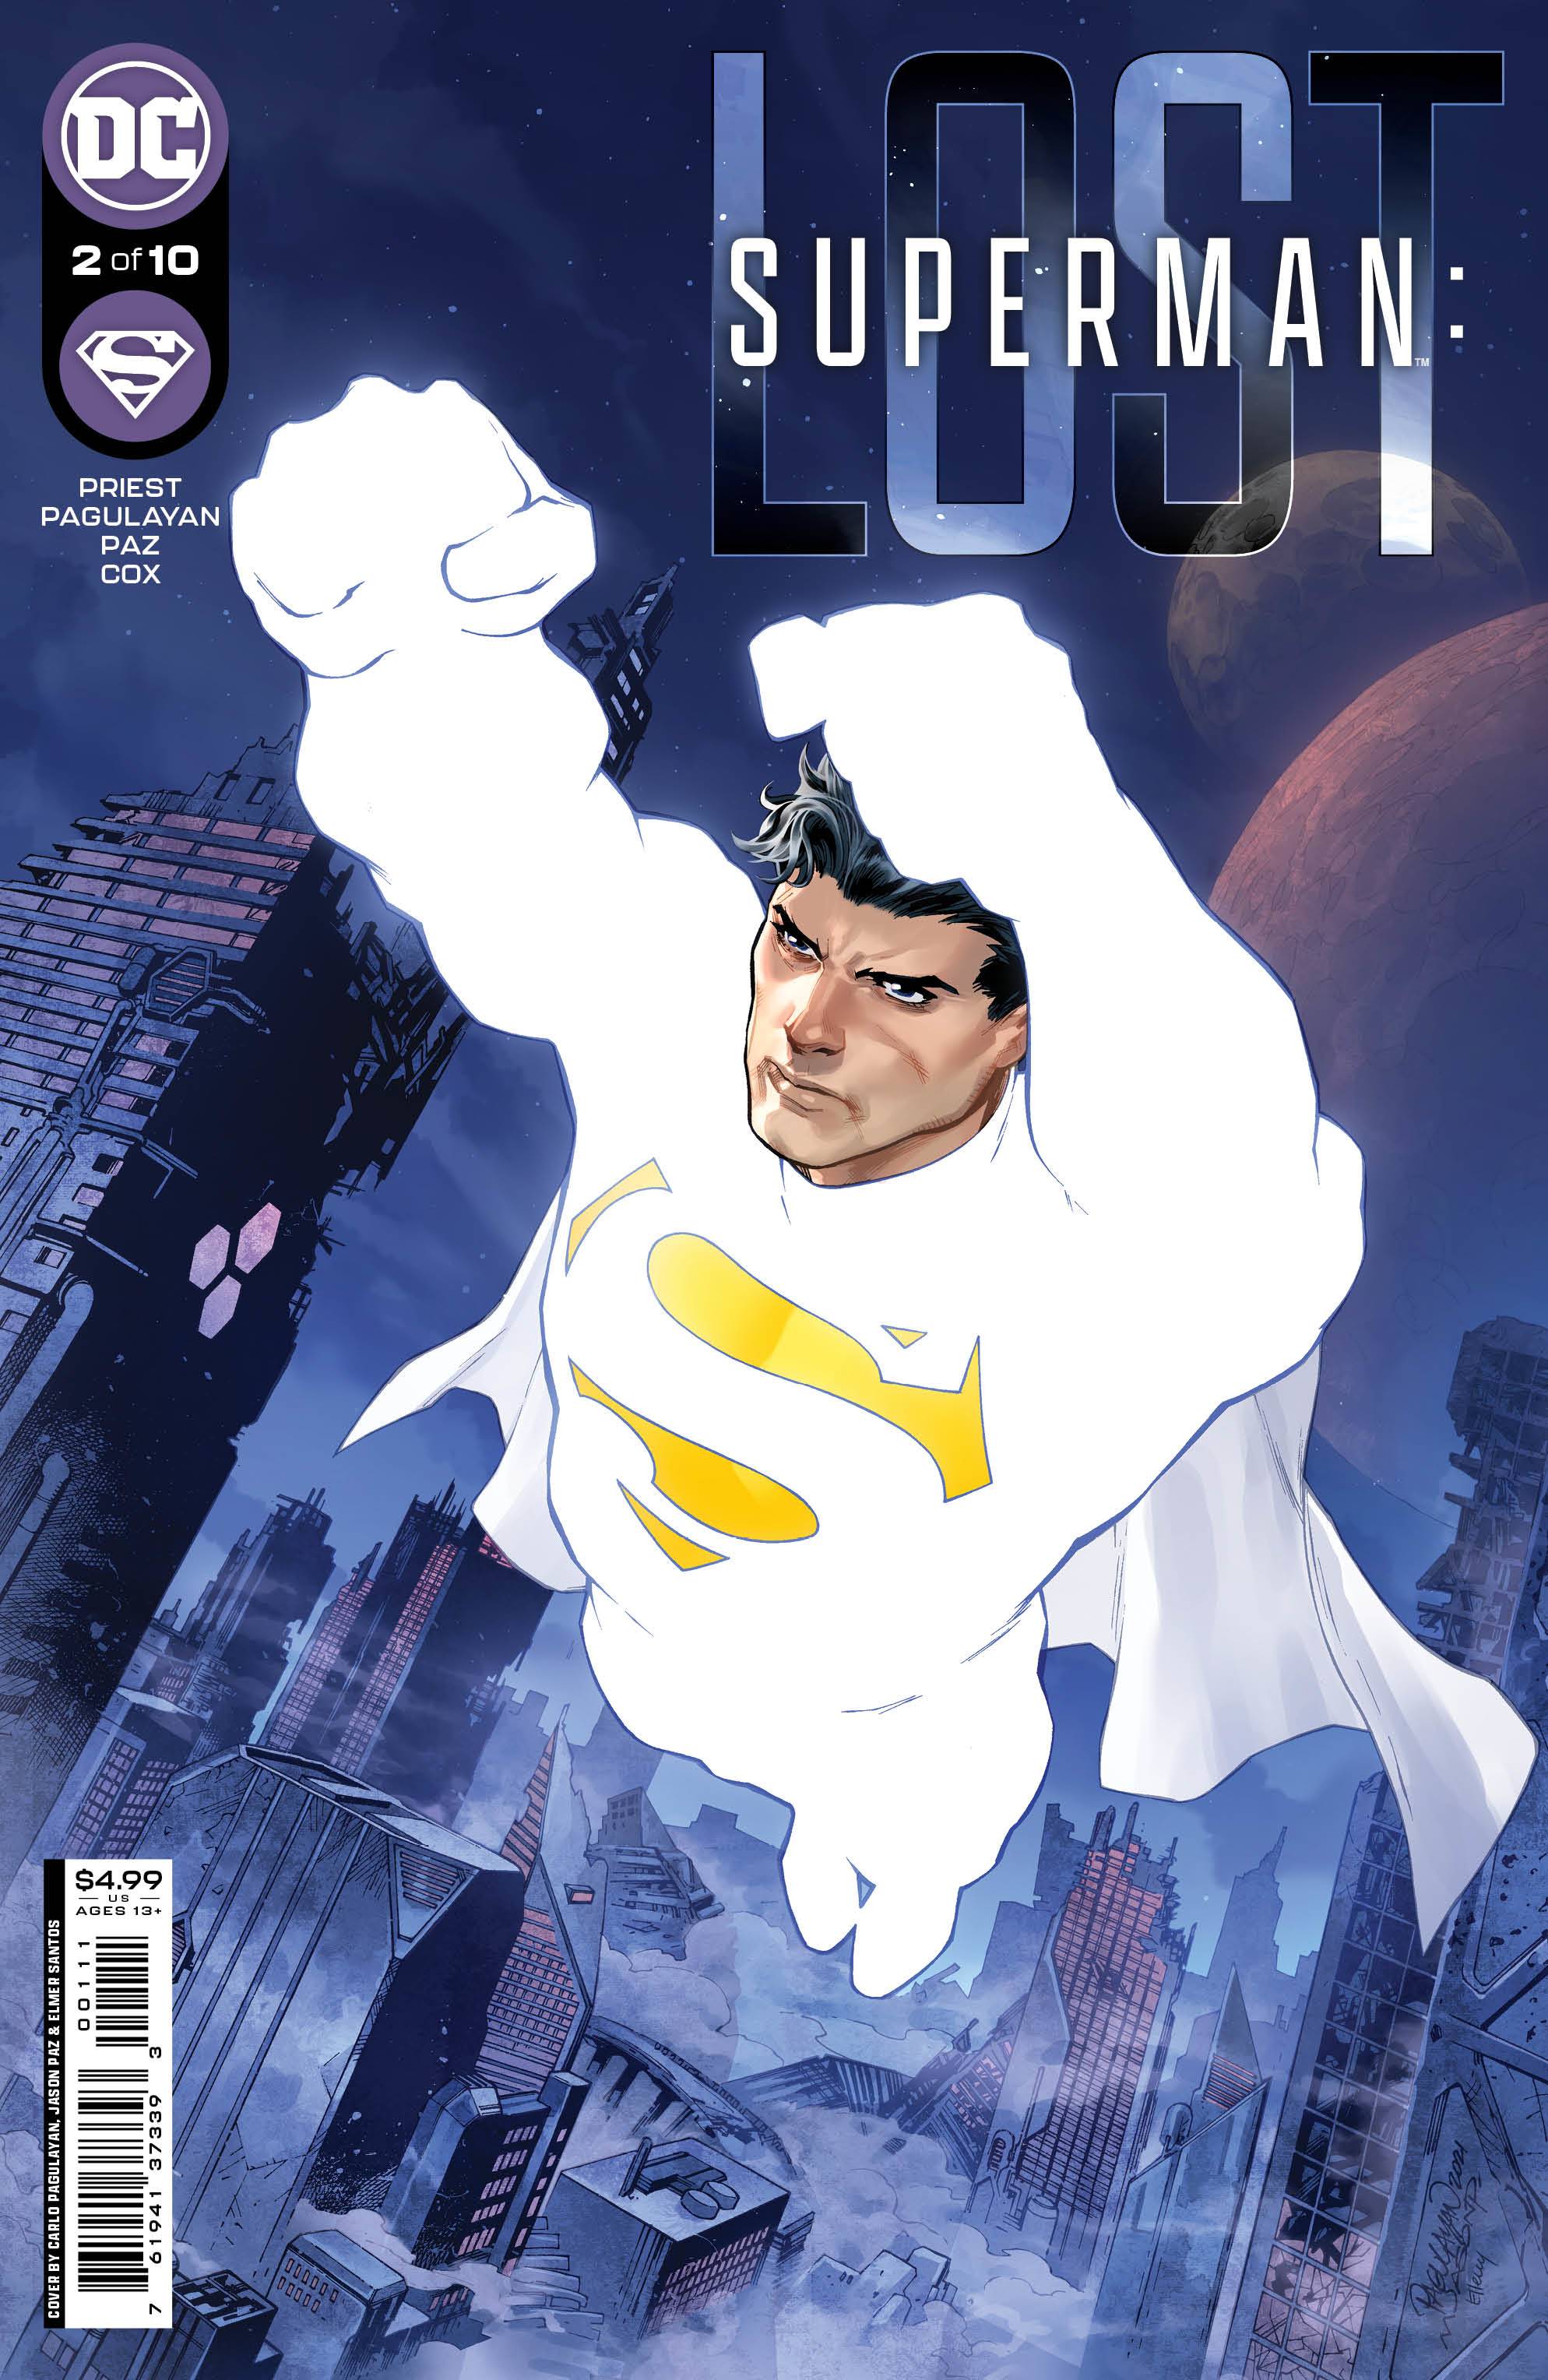 Superman lost issue 3 release date